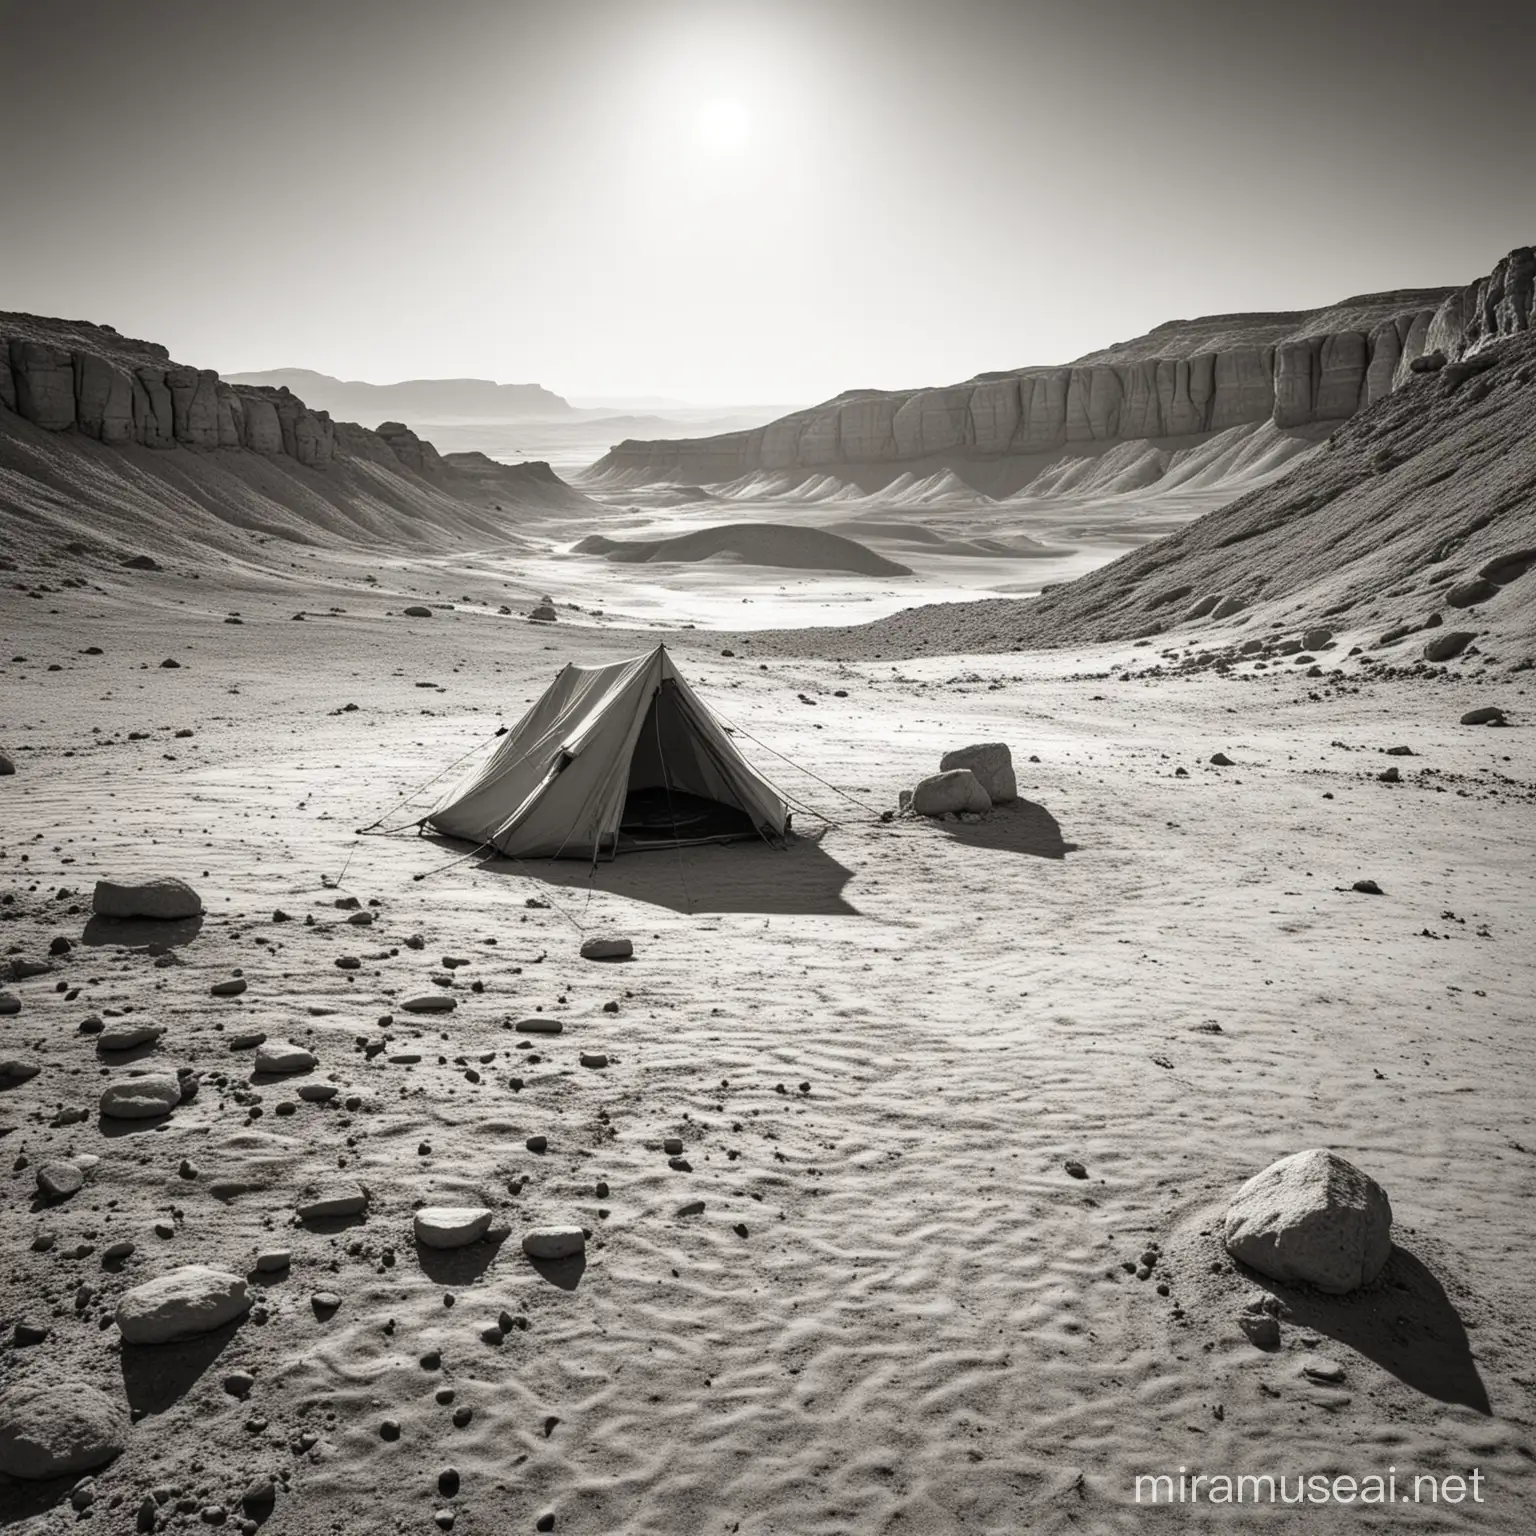 Hyperrealistic Isolated Camping Tent Amidst the Ramon Craters Desert Landscape